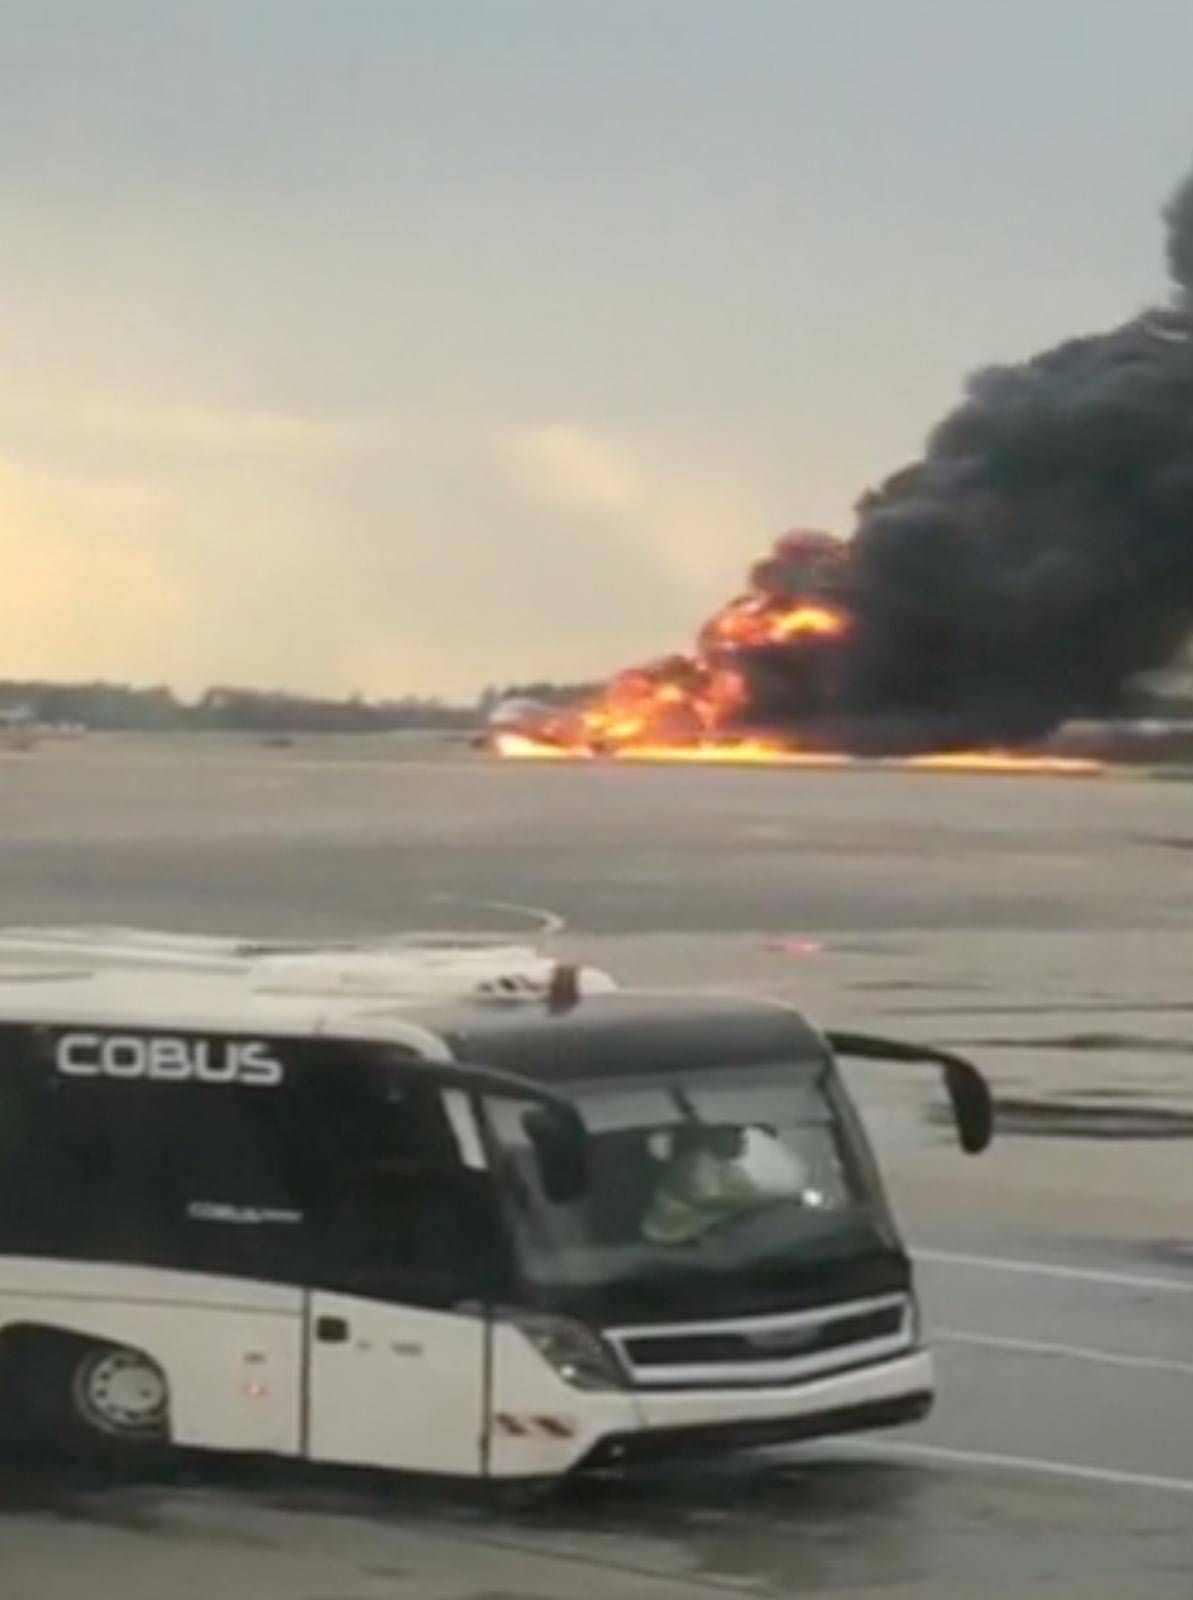 Sukhoi passenger plane is engulfed in flames after it made an emergency landing due to an onboard fire at Sheremetyevo International Airport